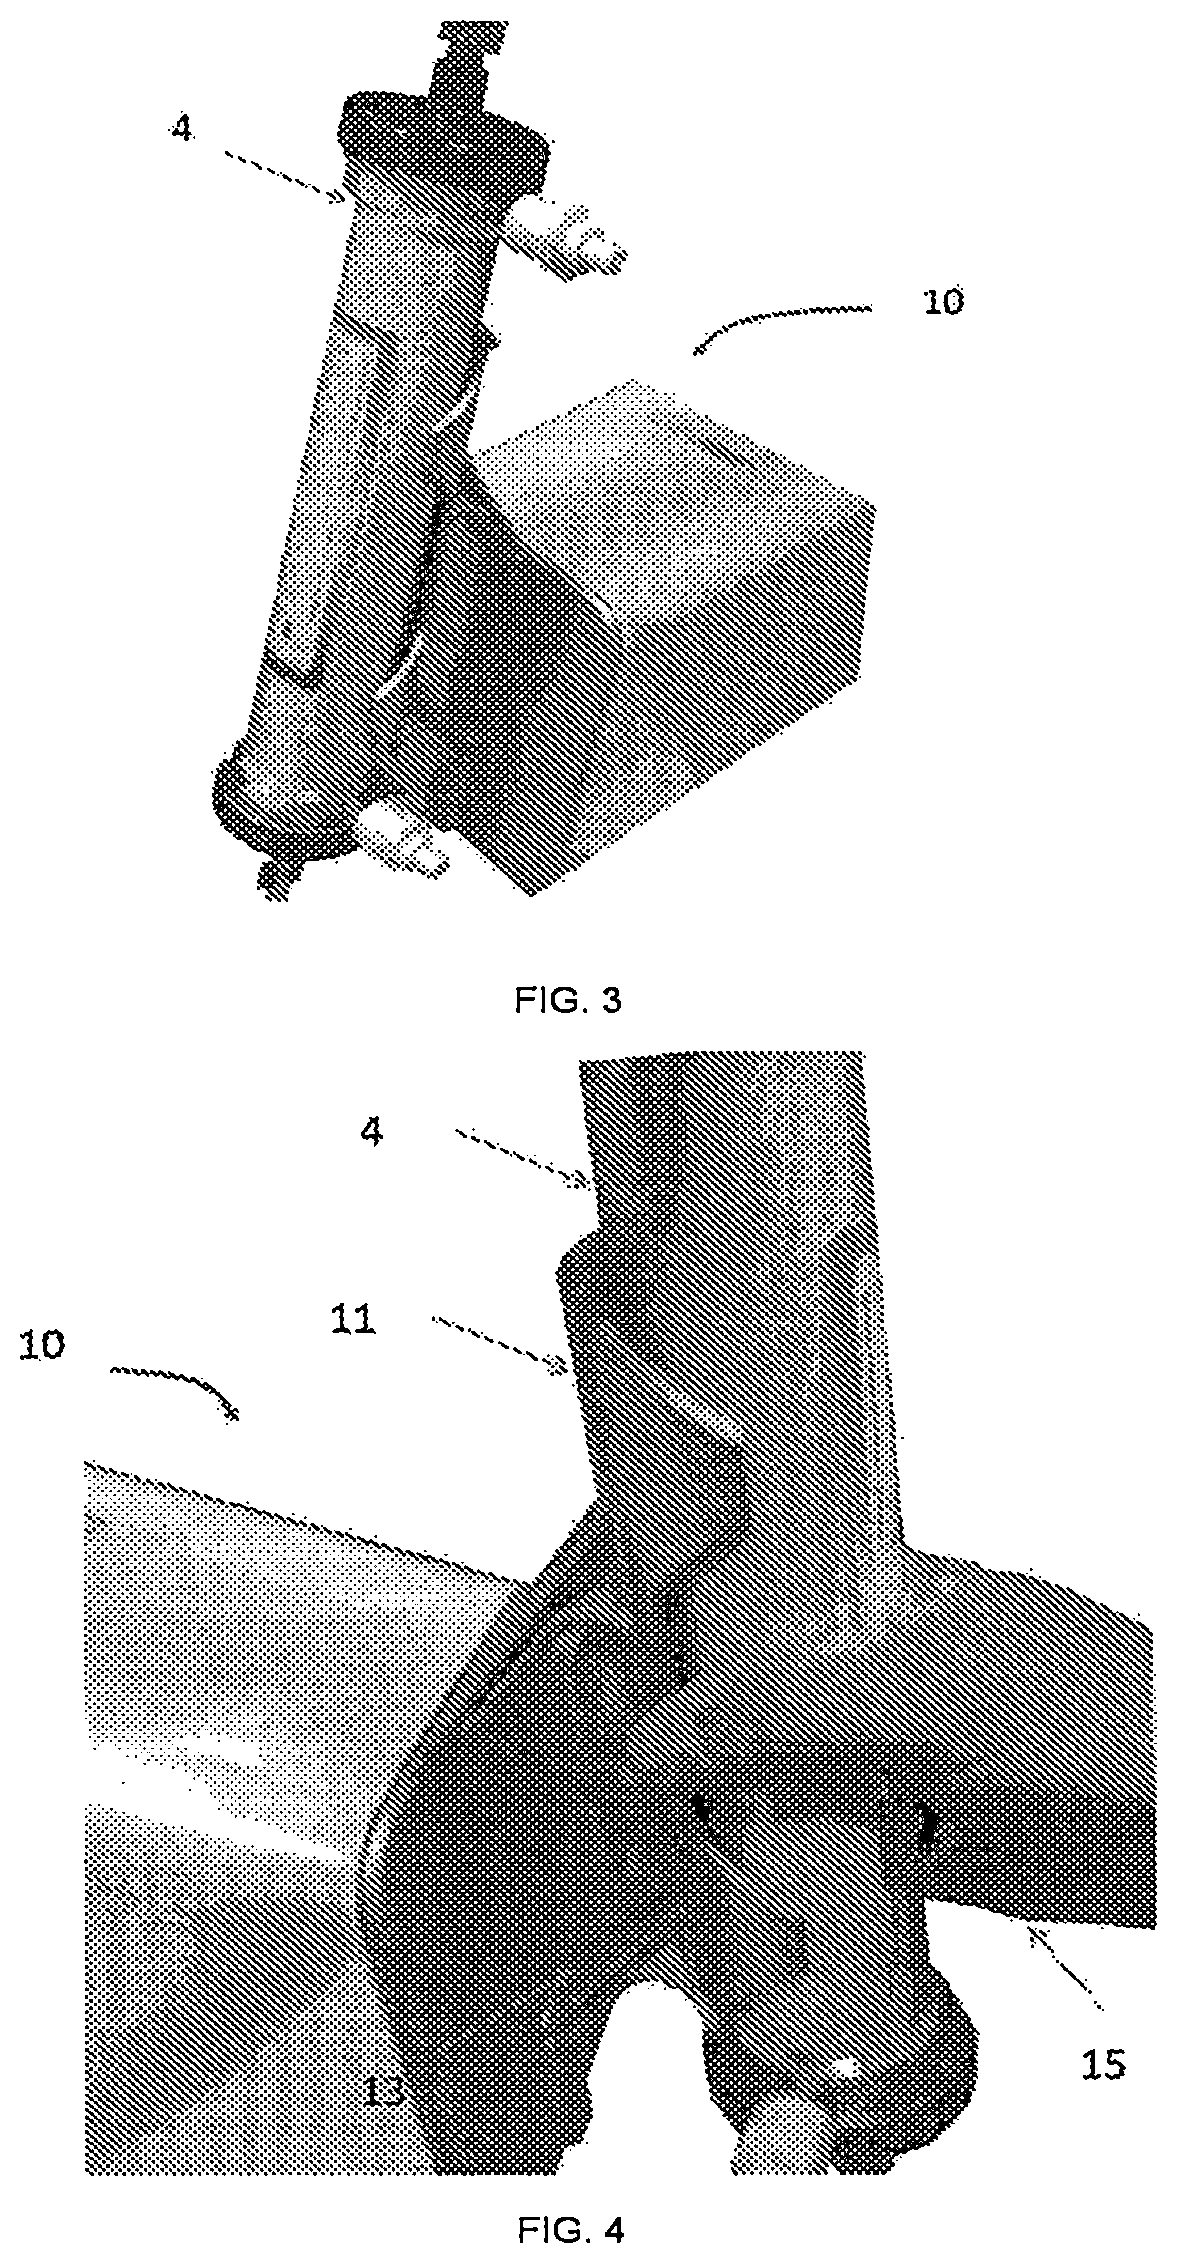 Handle for a medical device